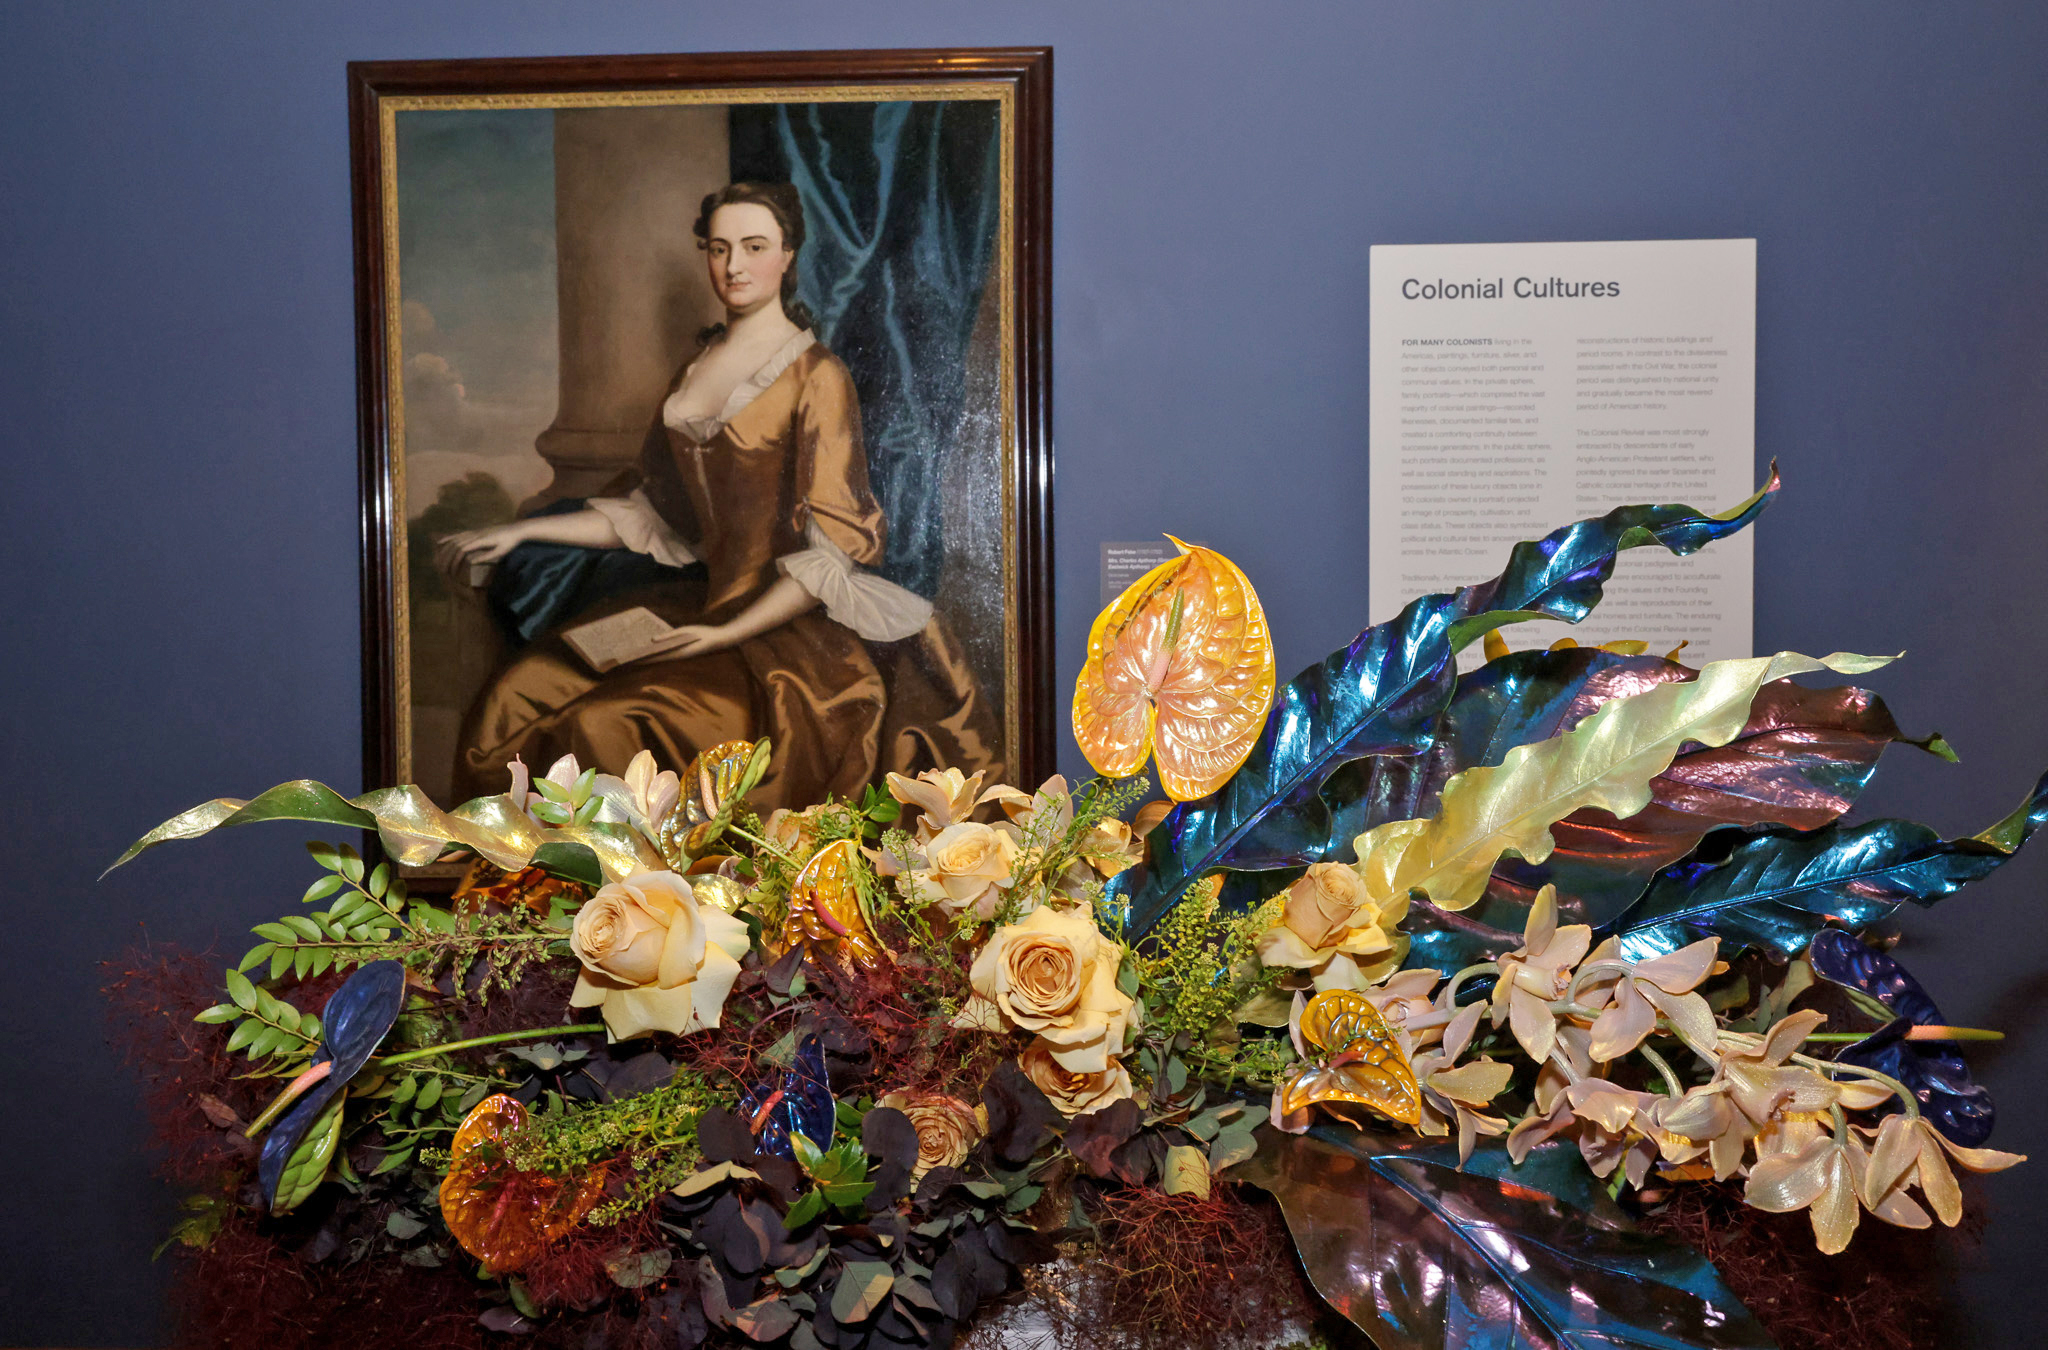 The image shows a framed portrait of a woman in historical attire, displayed on a blue wall with a floral arrangement of roses and glossy leaves beneath it.